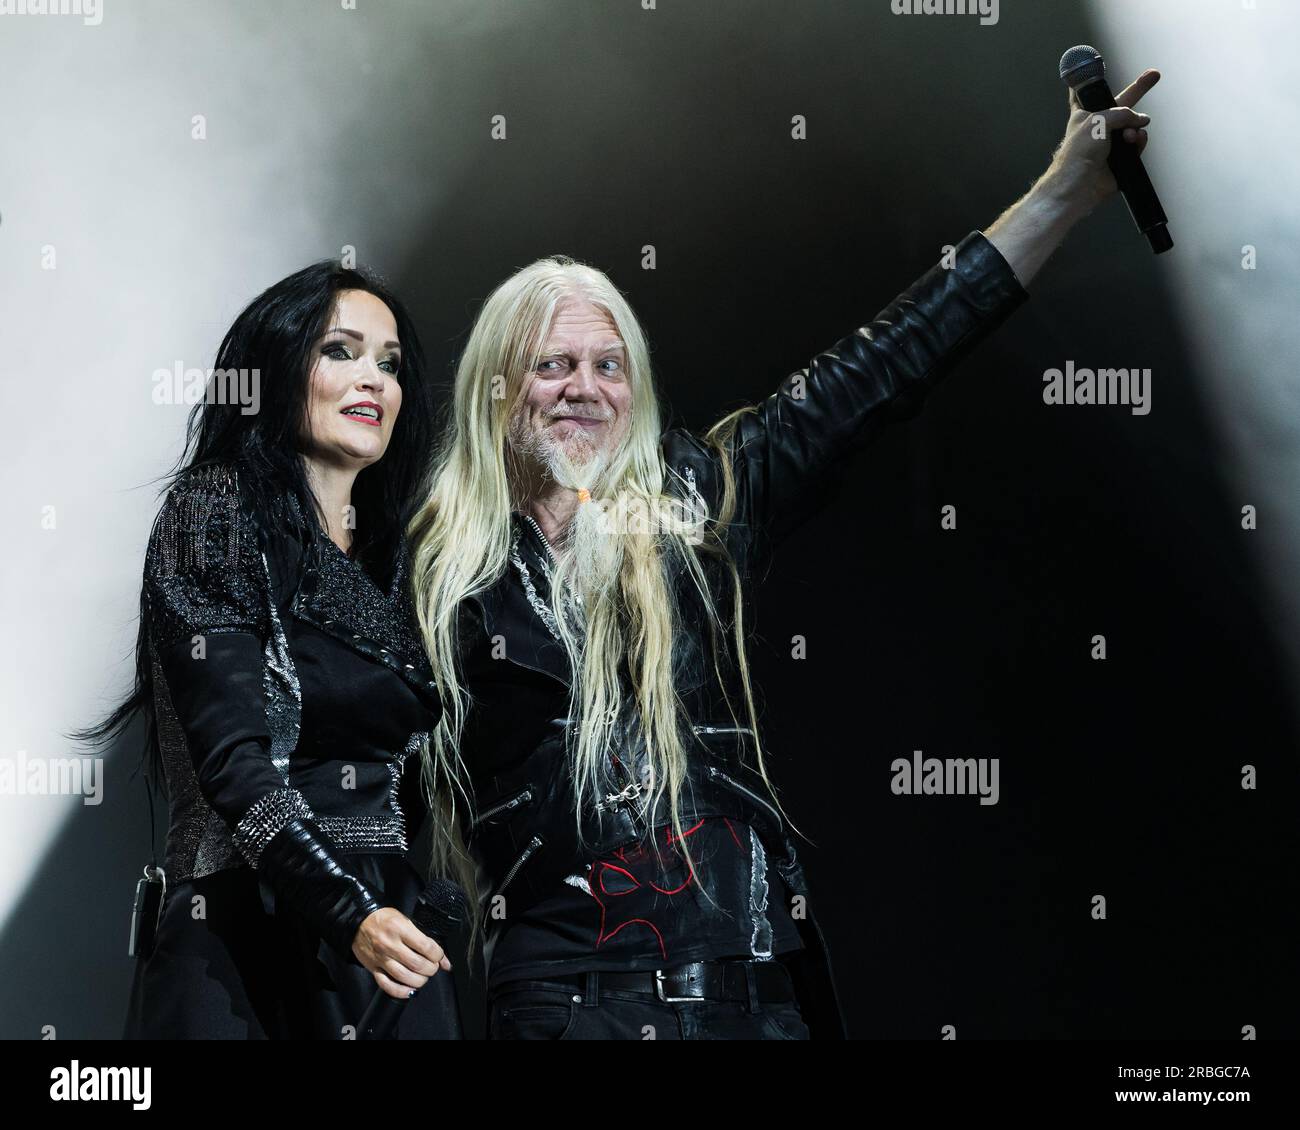 08.07.2023, Pratteln, Z7, Summer Nights, Tarja - Marko Hietala, Tarja Turunen and Marko Hietala, Both Ex Nightwish members together again on stage for the first time sincs 2005. Stock Photo